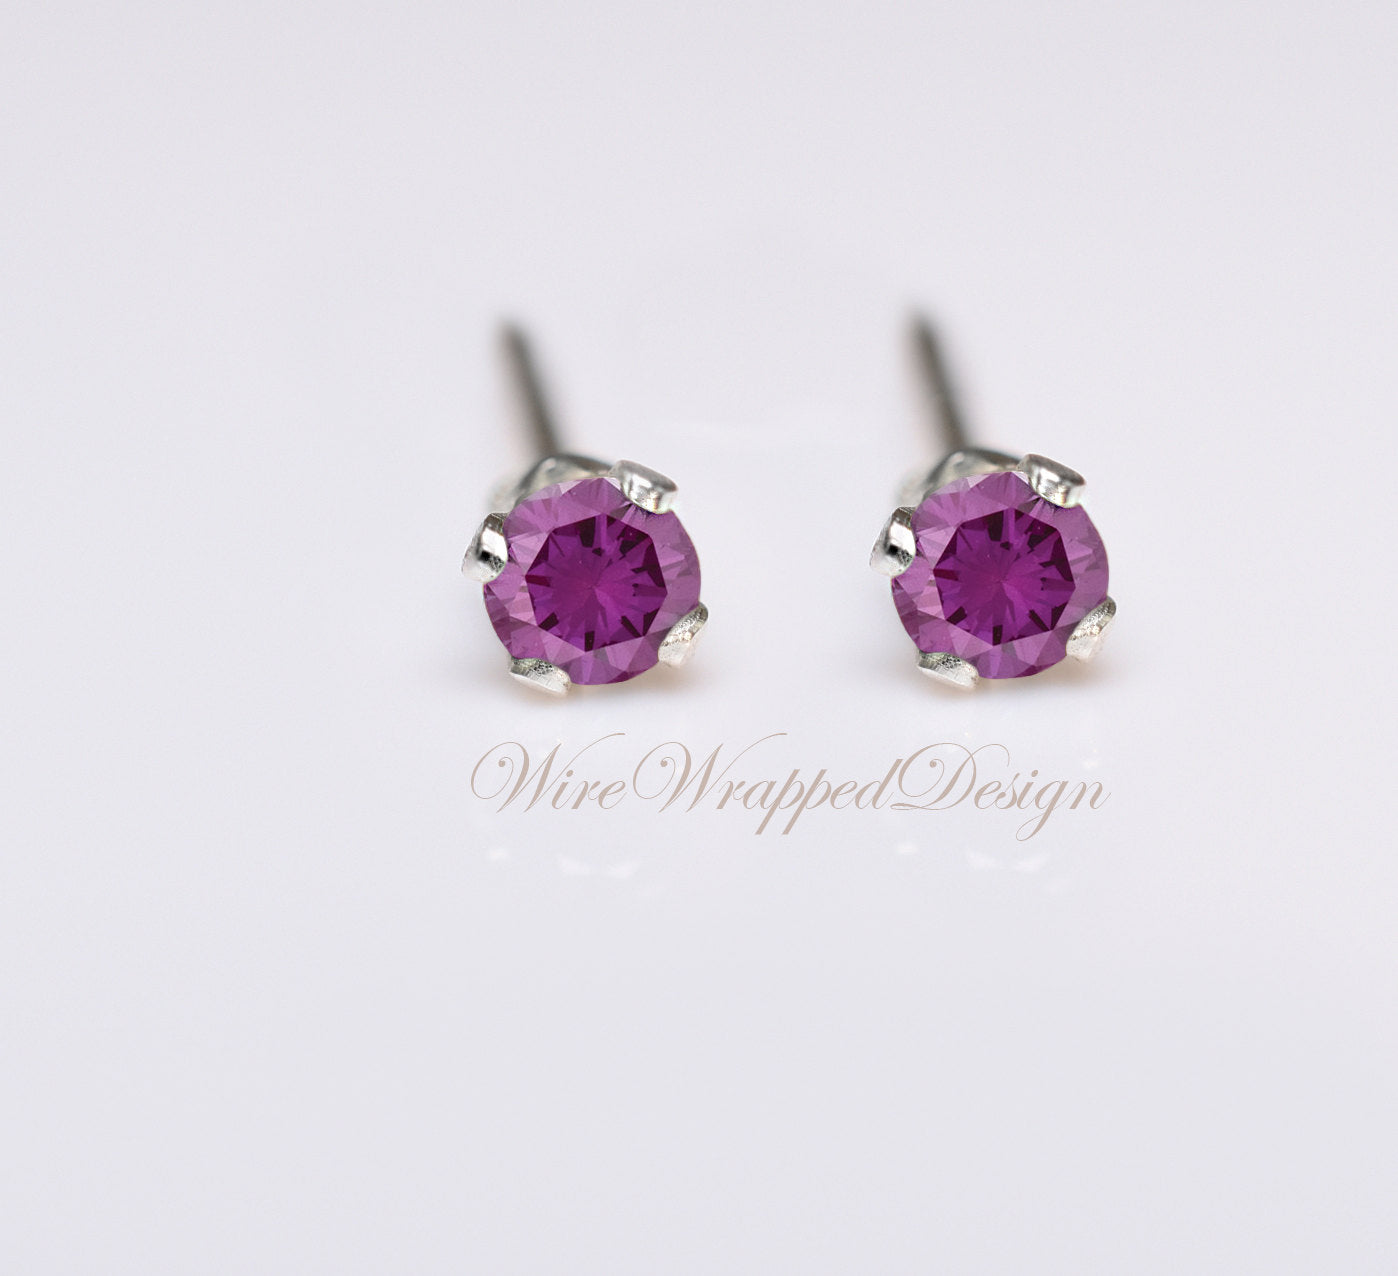 Genuine PURPLE DIAMOND Earring Studs 2mm 0.08tcw Post 14k Solid Gold (Yellow, Rose or White), Platinum, Silver Lobe Cartilage Helix Tragus